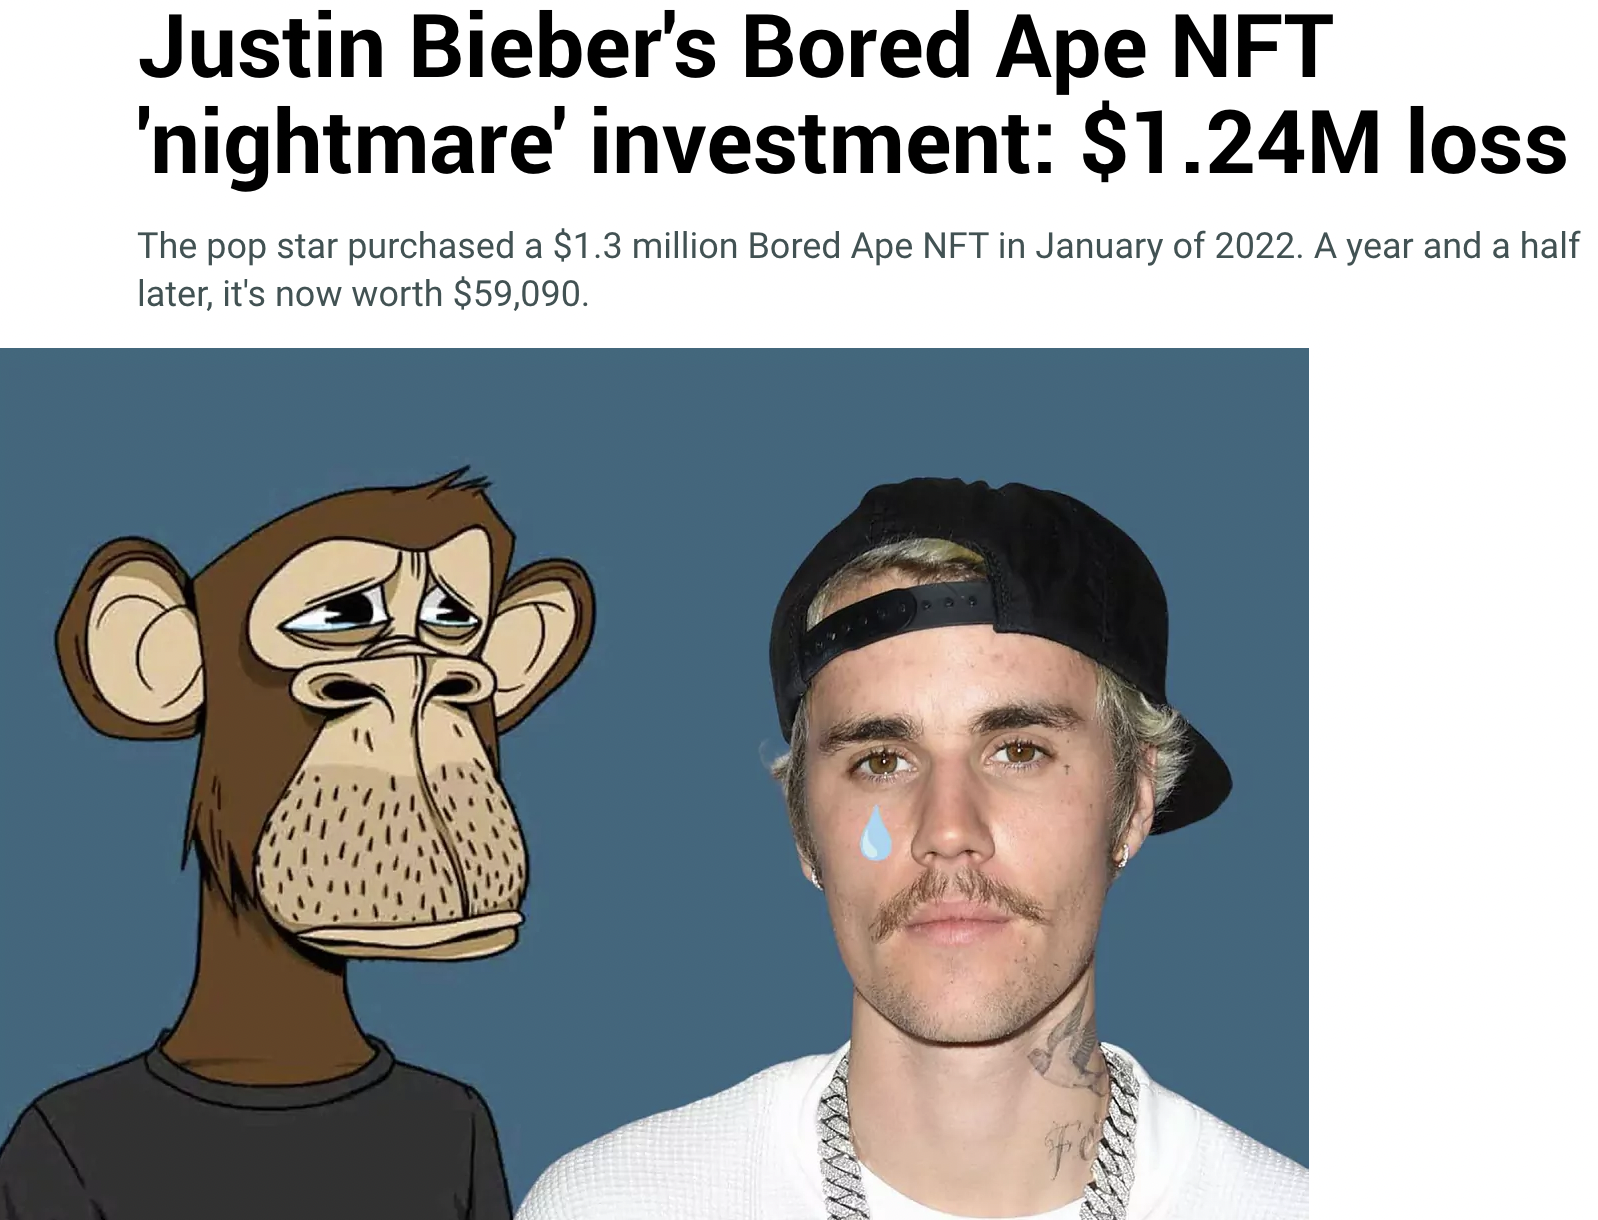 cartoon - Justin Bieber's Bored Ape Nft 'nightmare' investment $1.24M loss The pop star purchased a $1.3 million Bored Ape Nft in January of 2022. A year and a half later, it's now worth $59,090. www